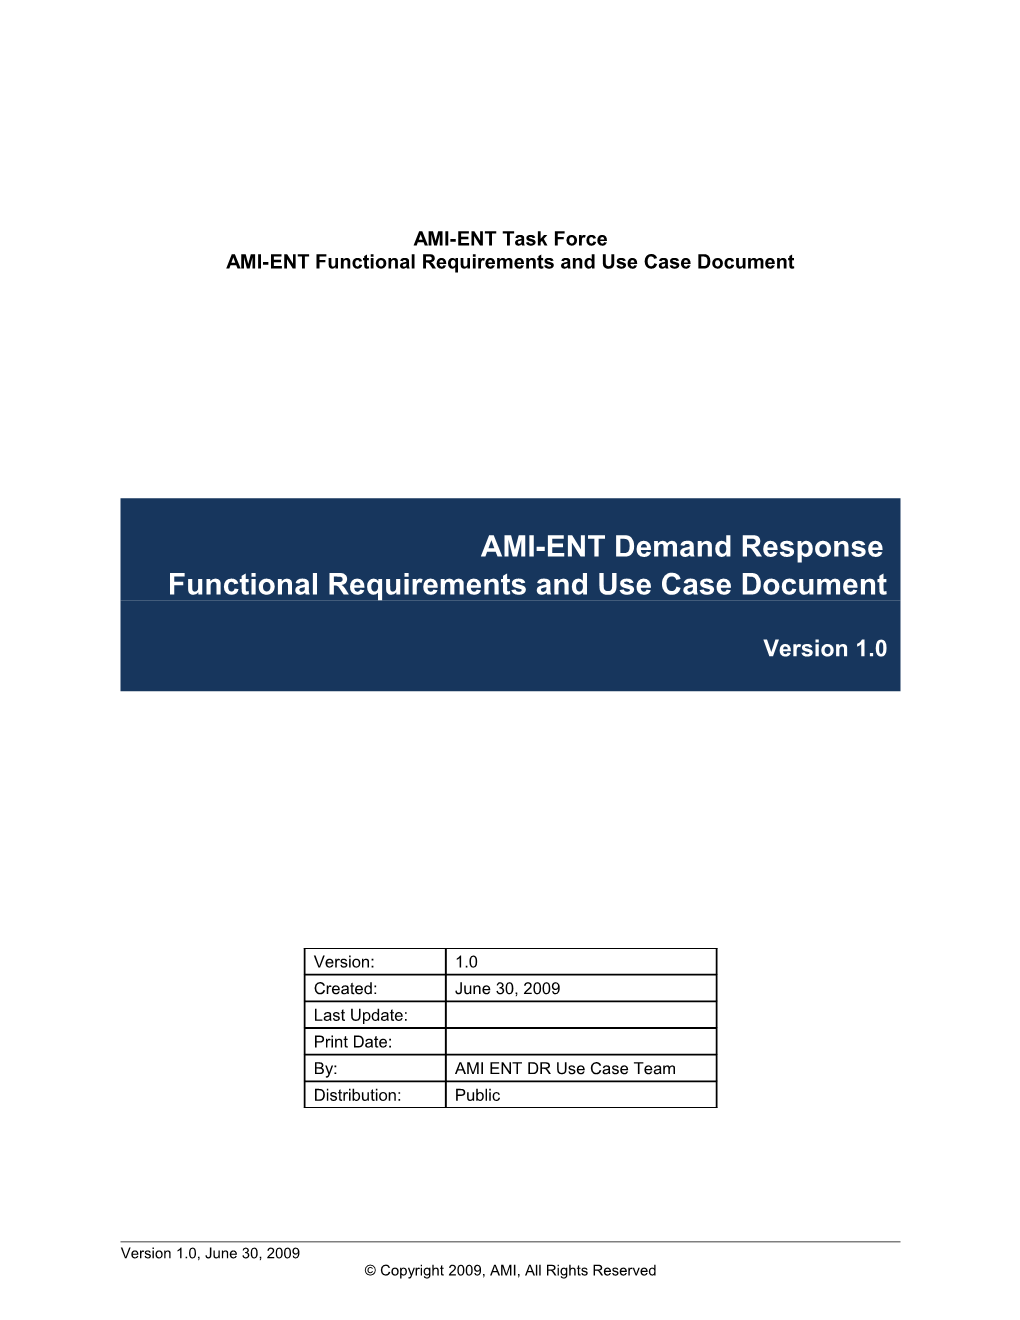 AMI-ENT Functional Requirements and Use Case Document